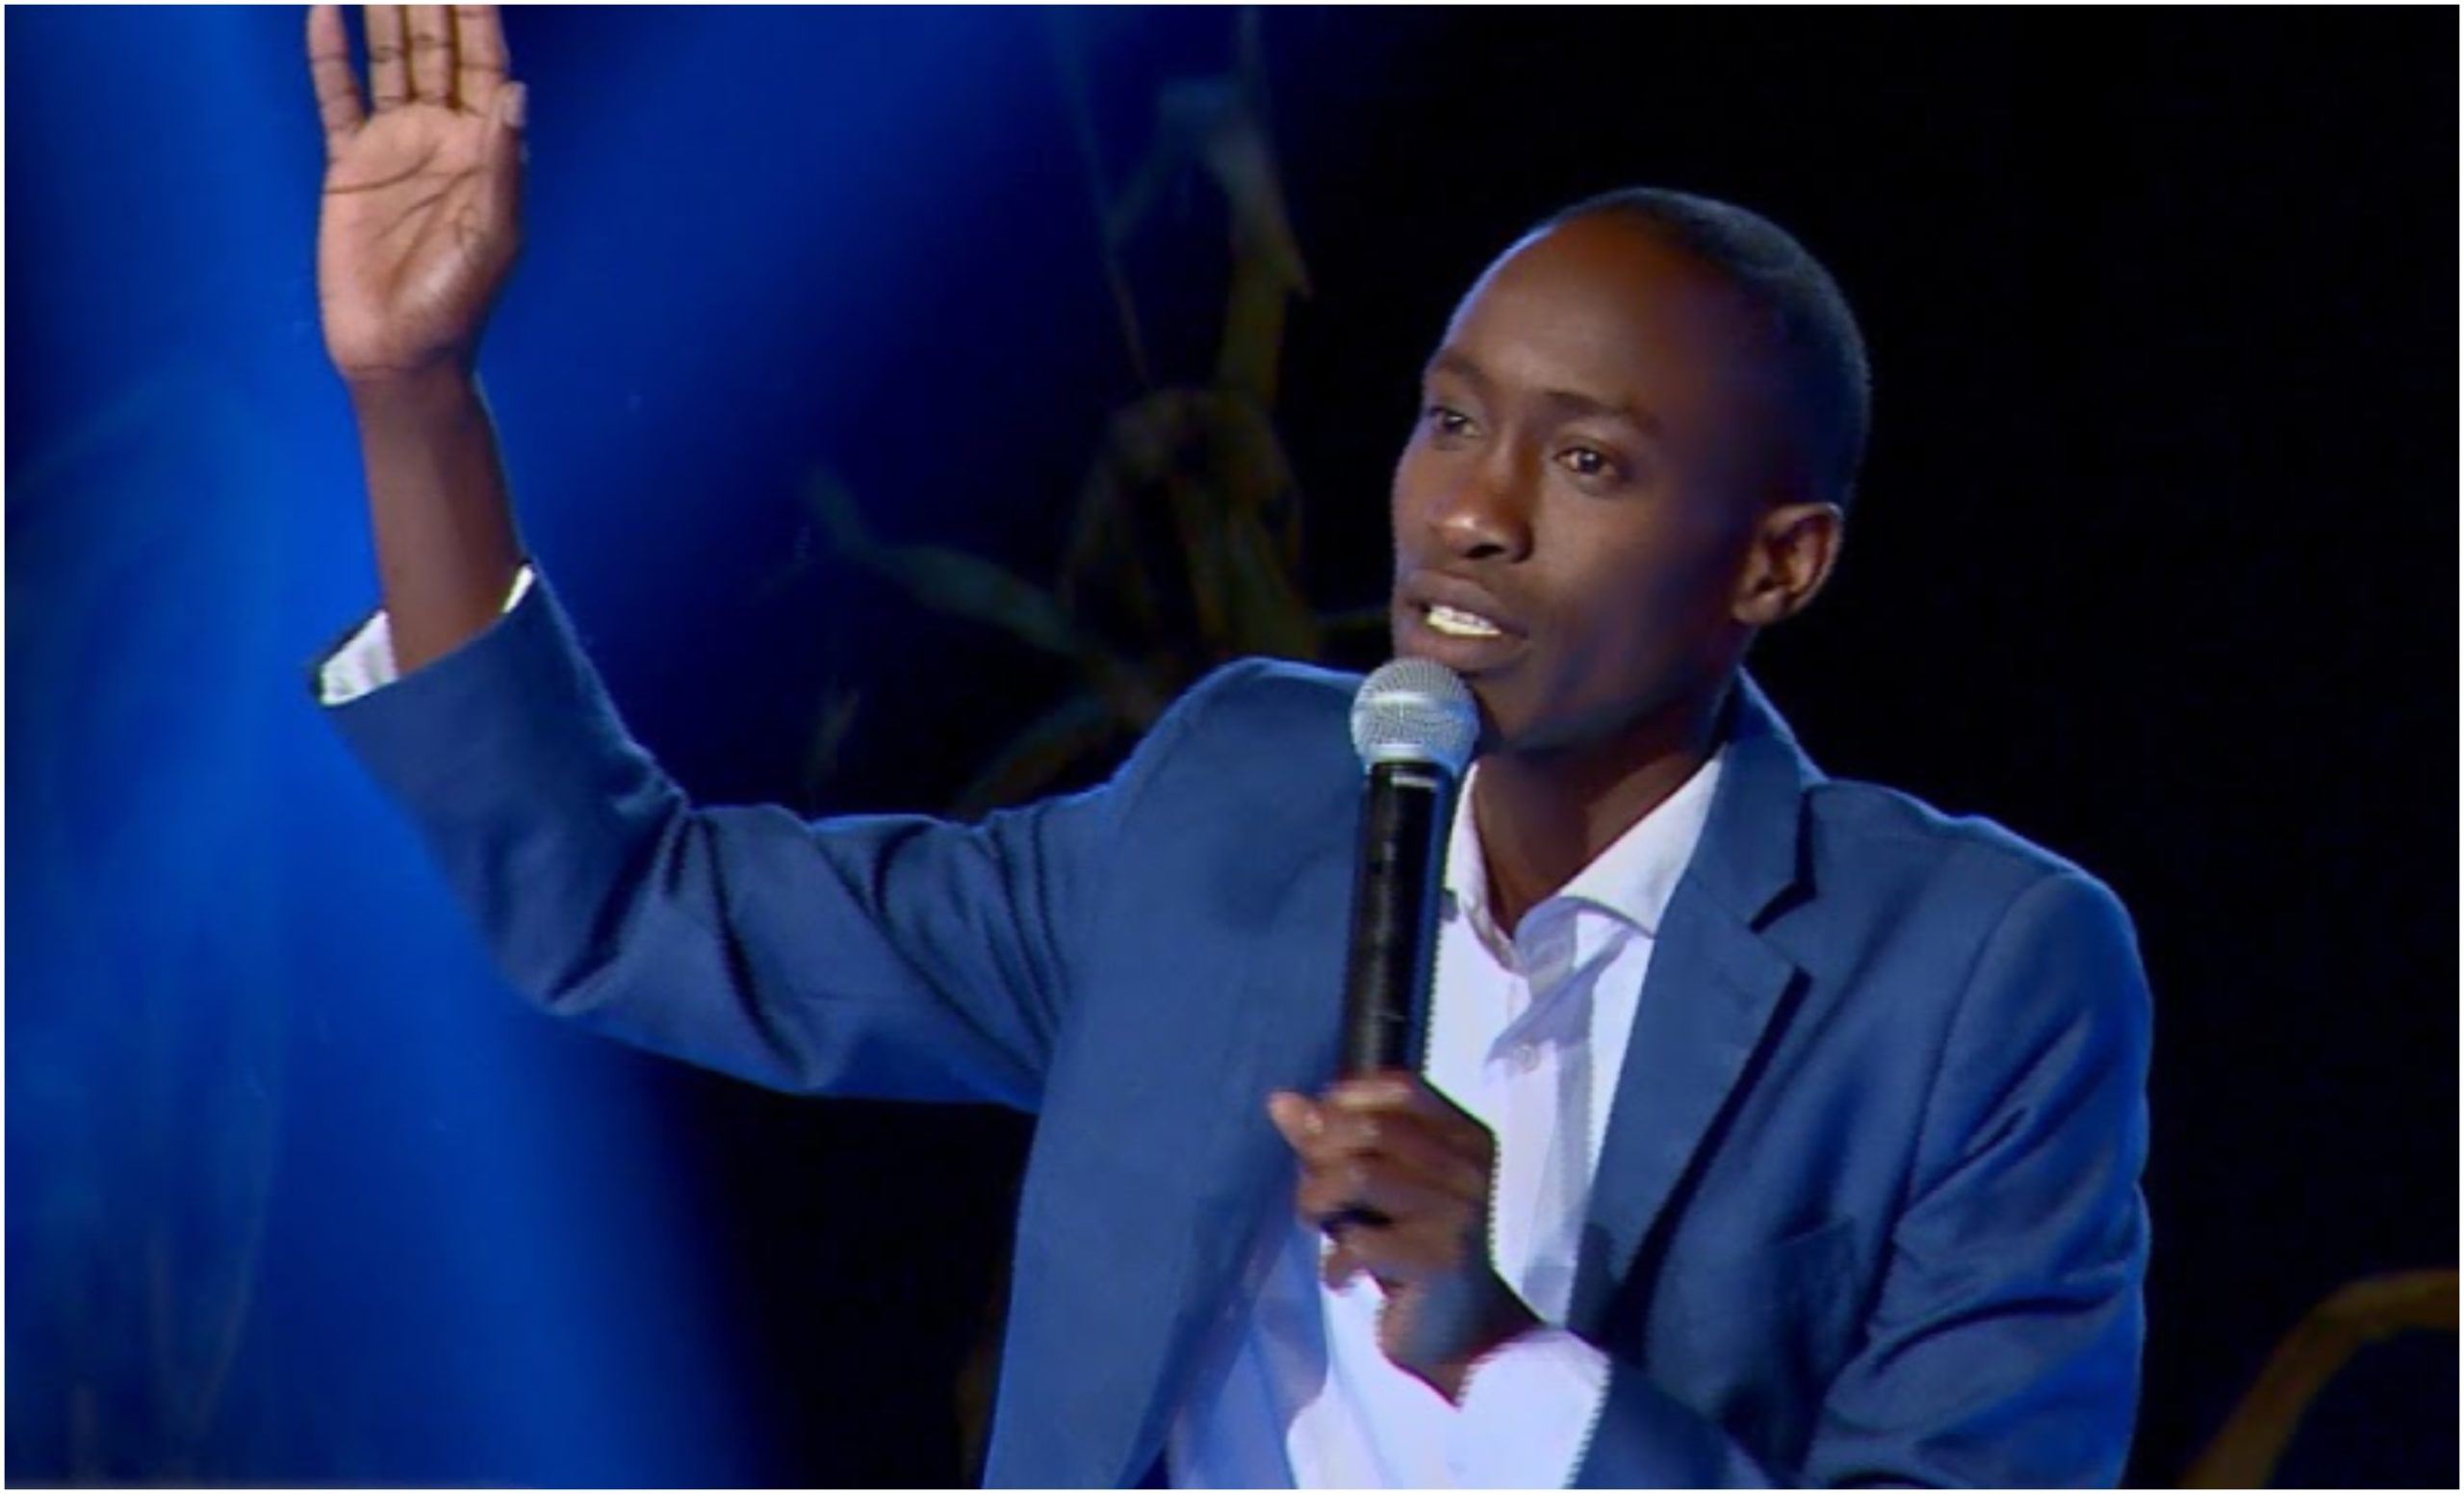 “Whatever job you have, I will do,” Churchill Show comedian appeals to Kenyans, after attempting suicide 3 times in a row